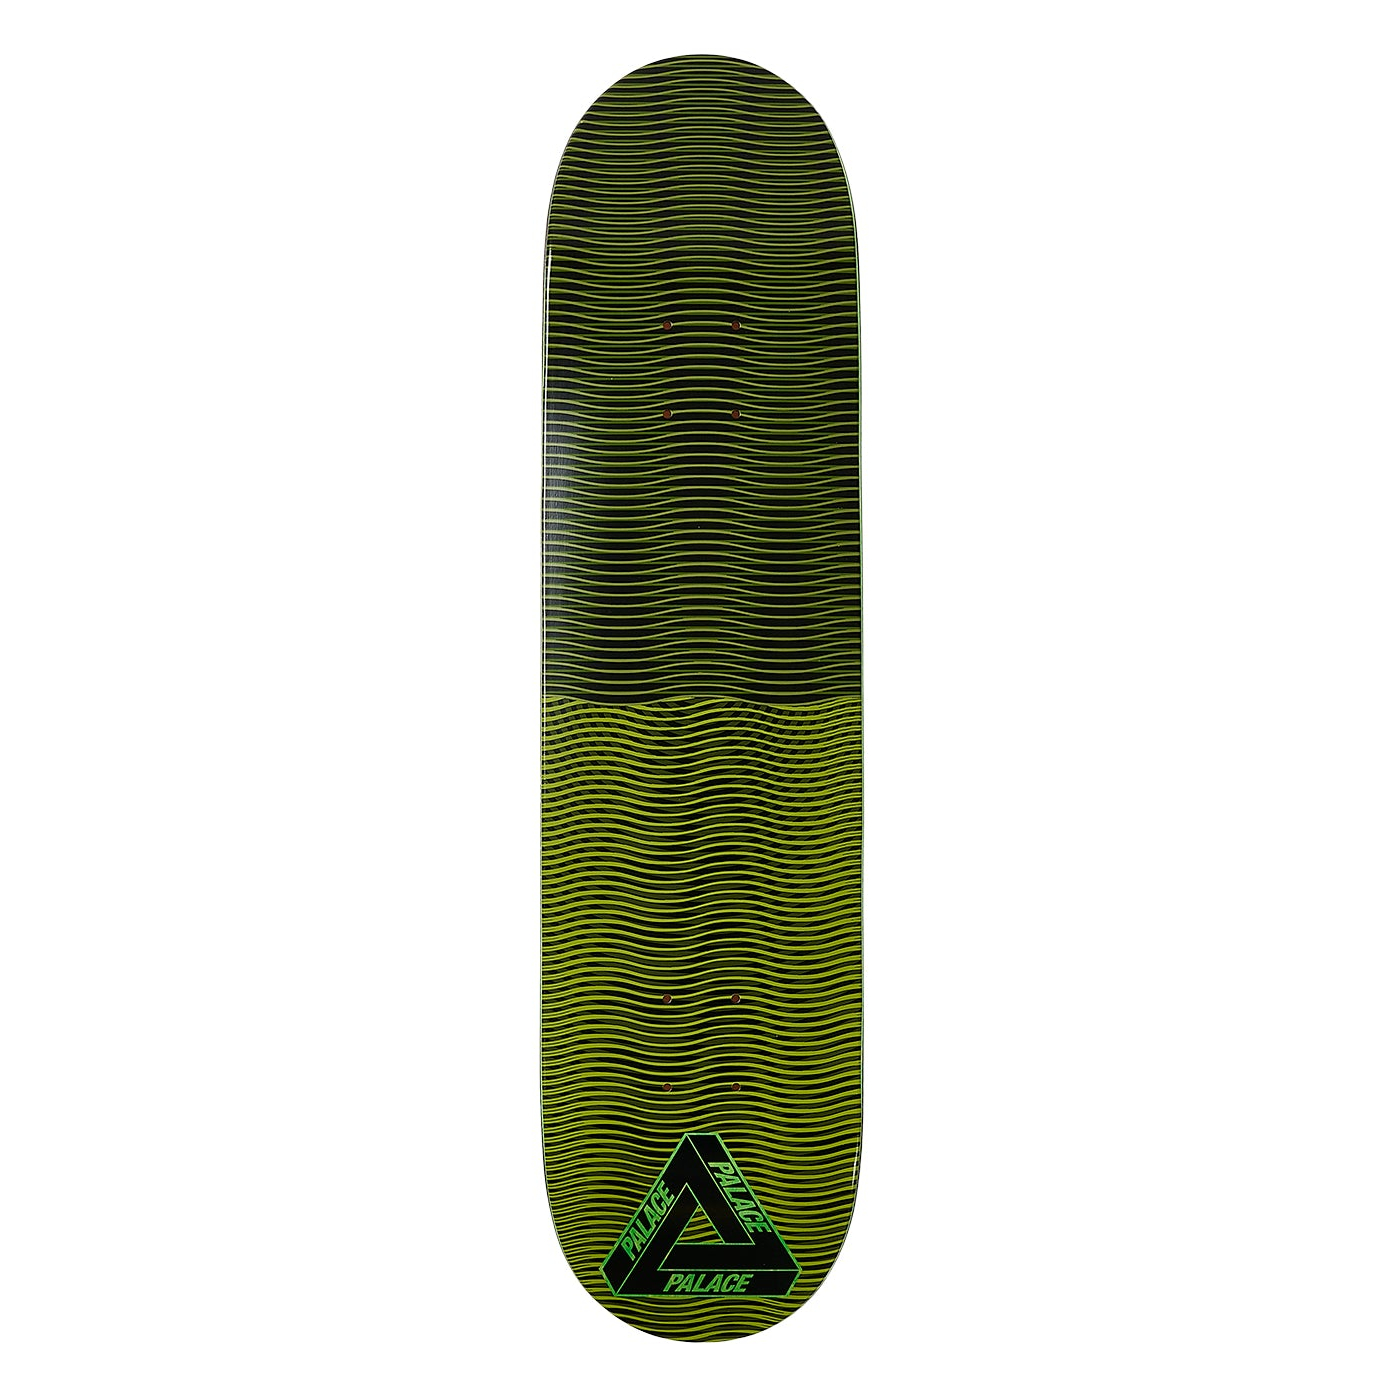 Thumbnail TRIPPY ARMY GREEN 7.75 one color